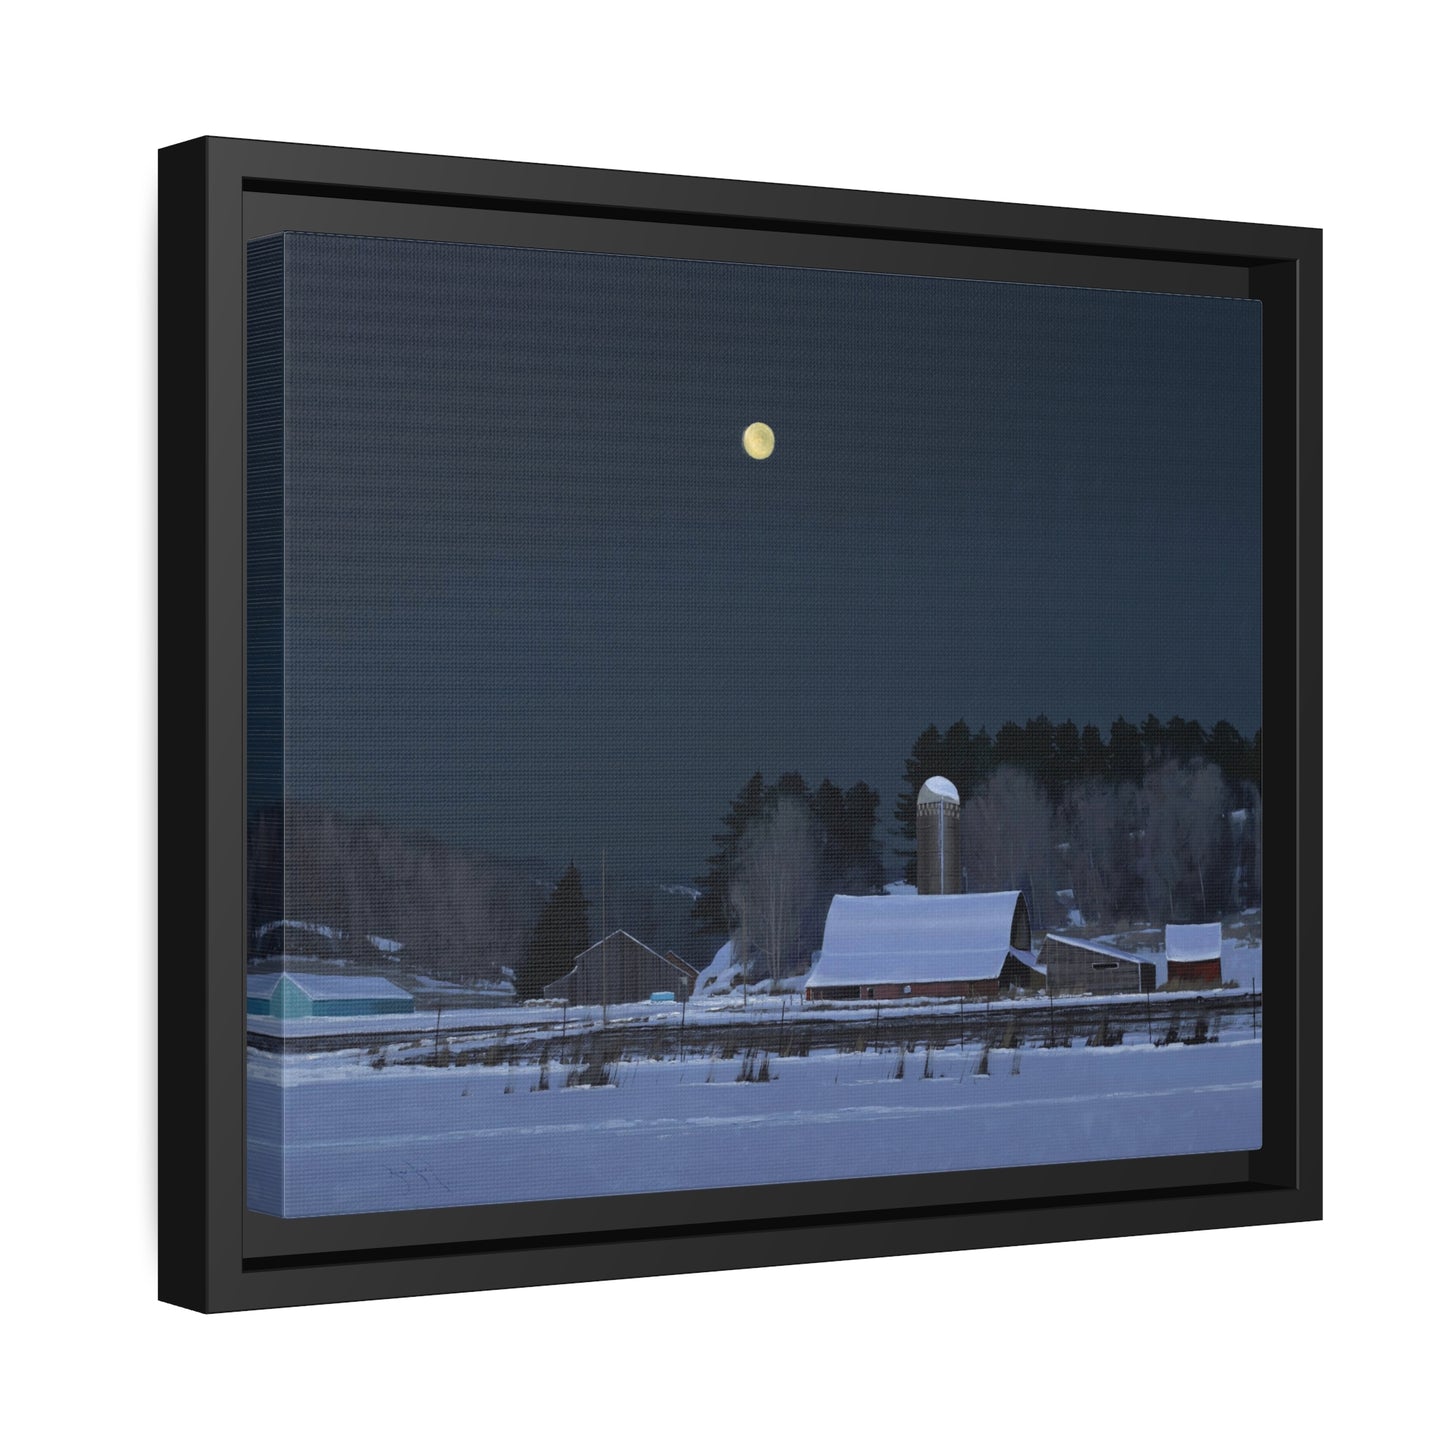 Ben Bauer: "Moonset, 7 Minutes to Sun Up" - Framed Canvas Reproduction